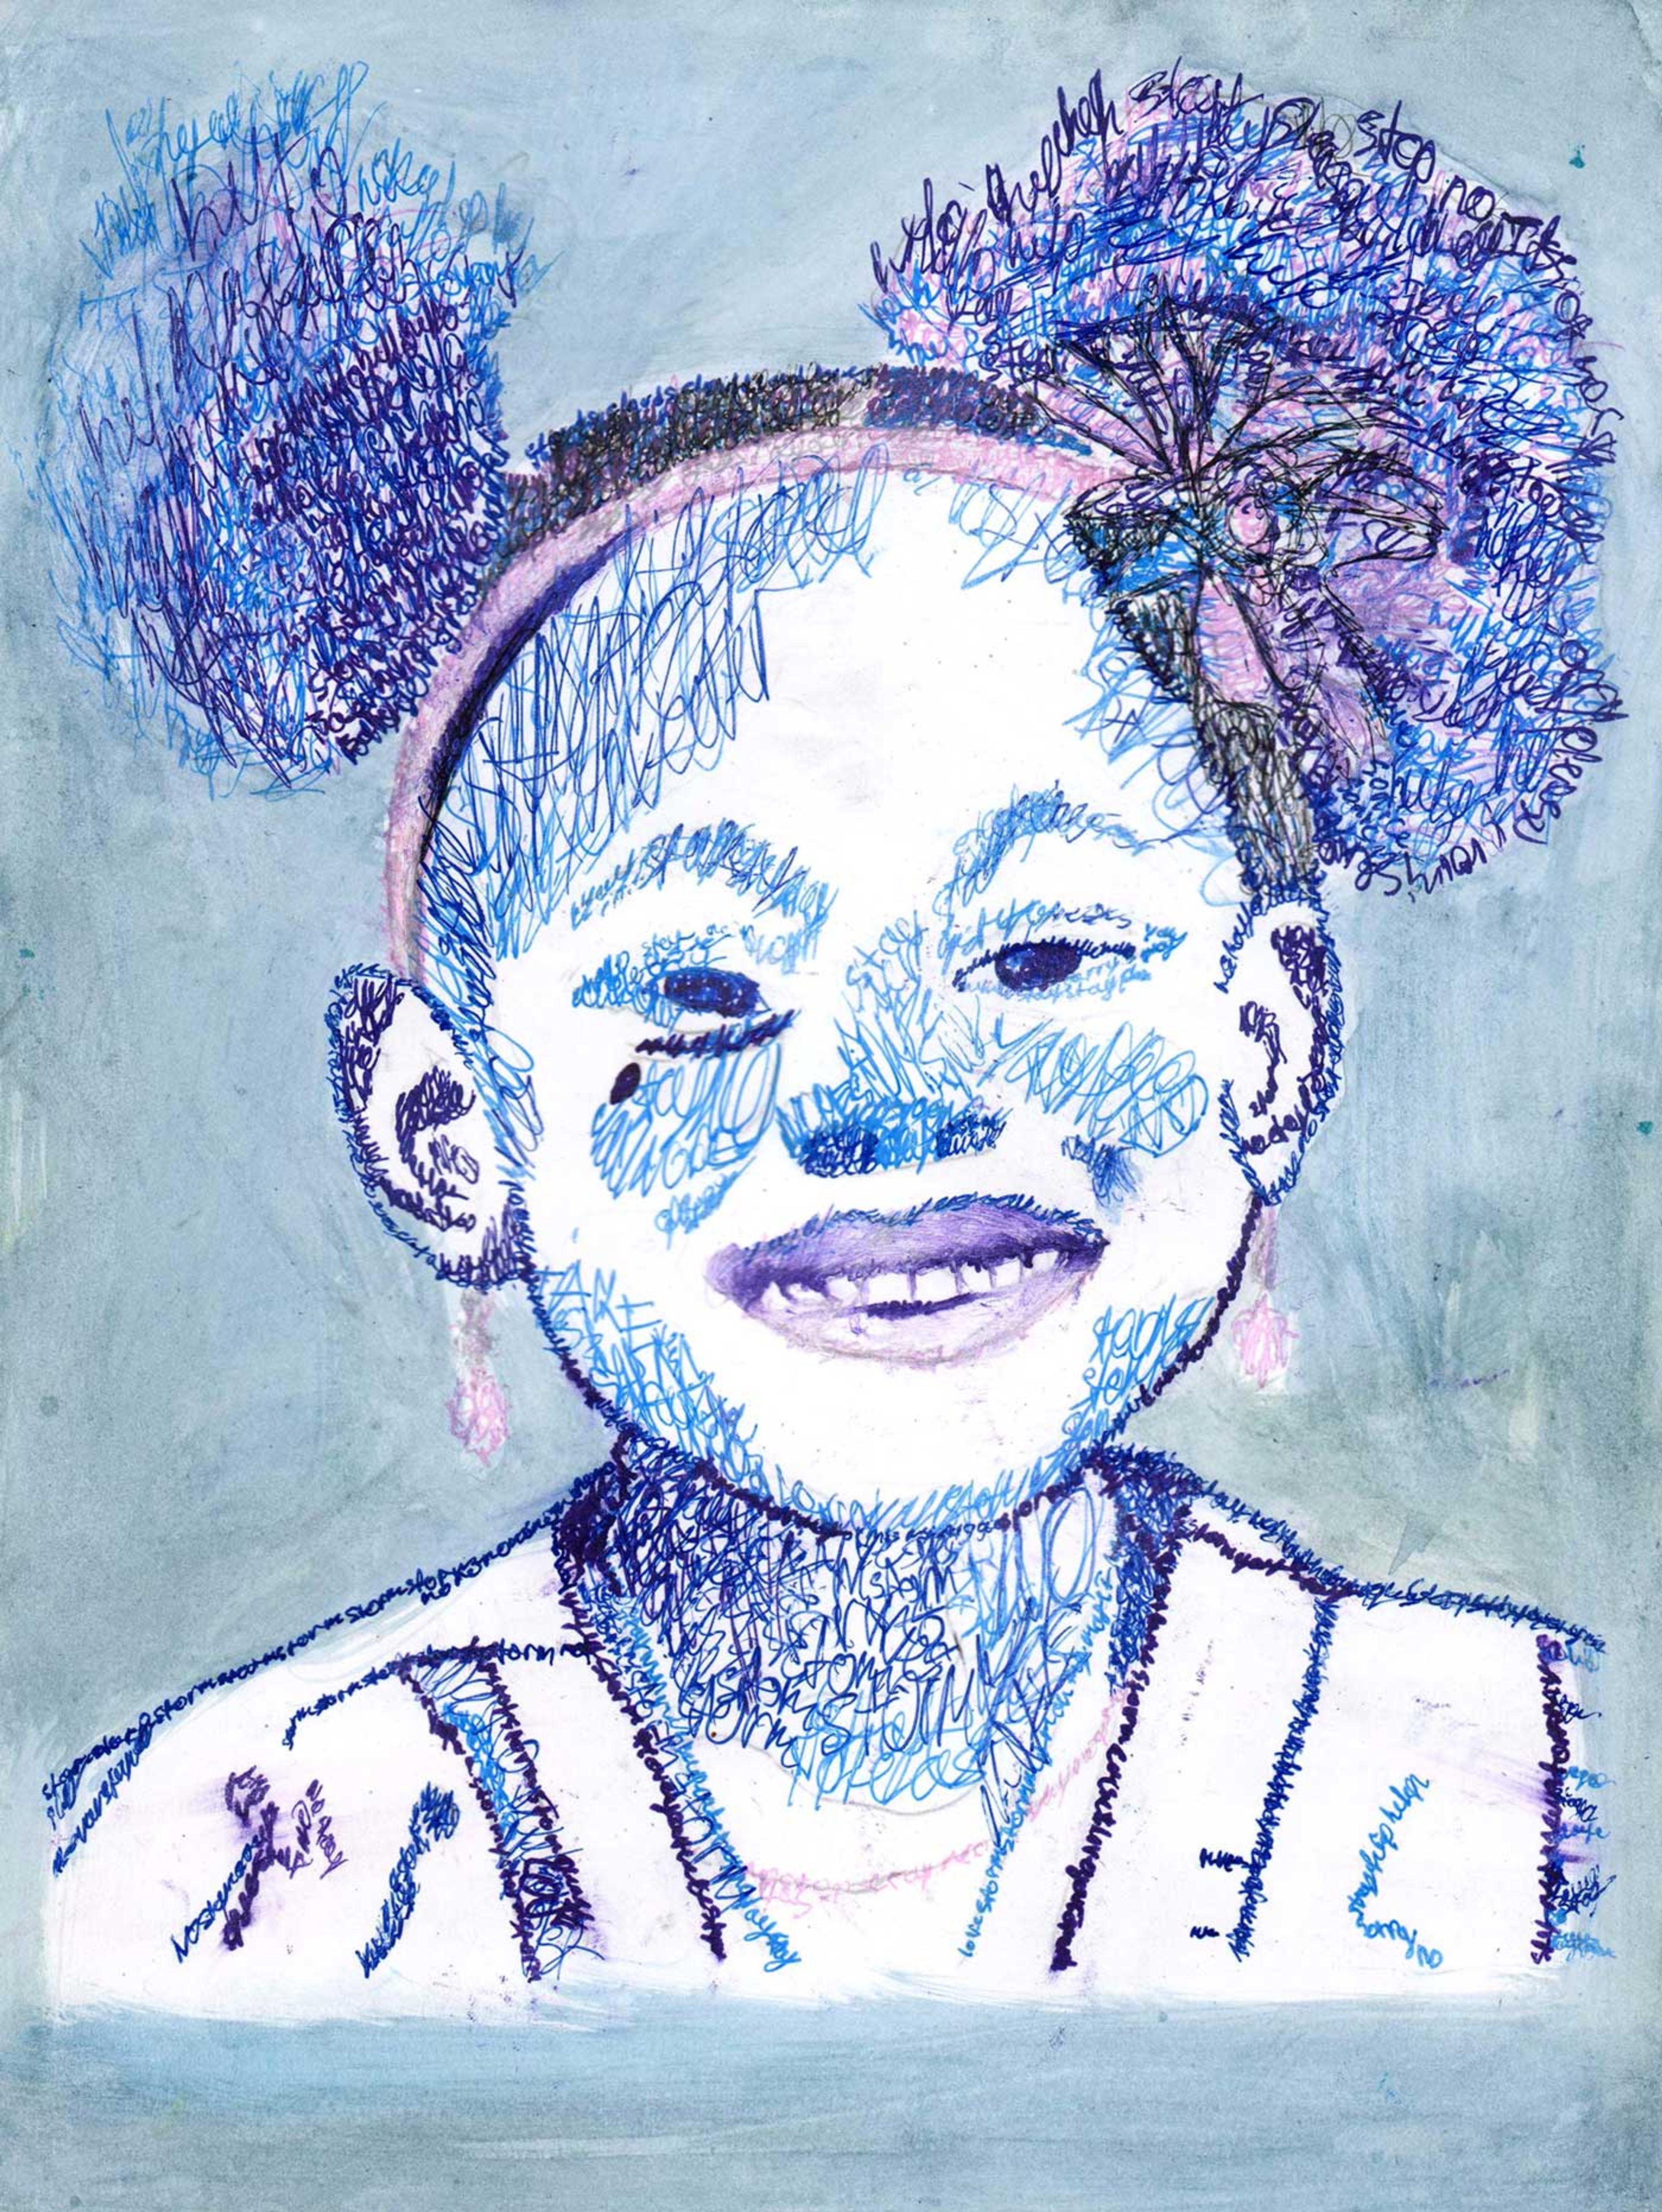 Portrait of a smiling young girl done in pinks and blues.